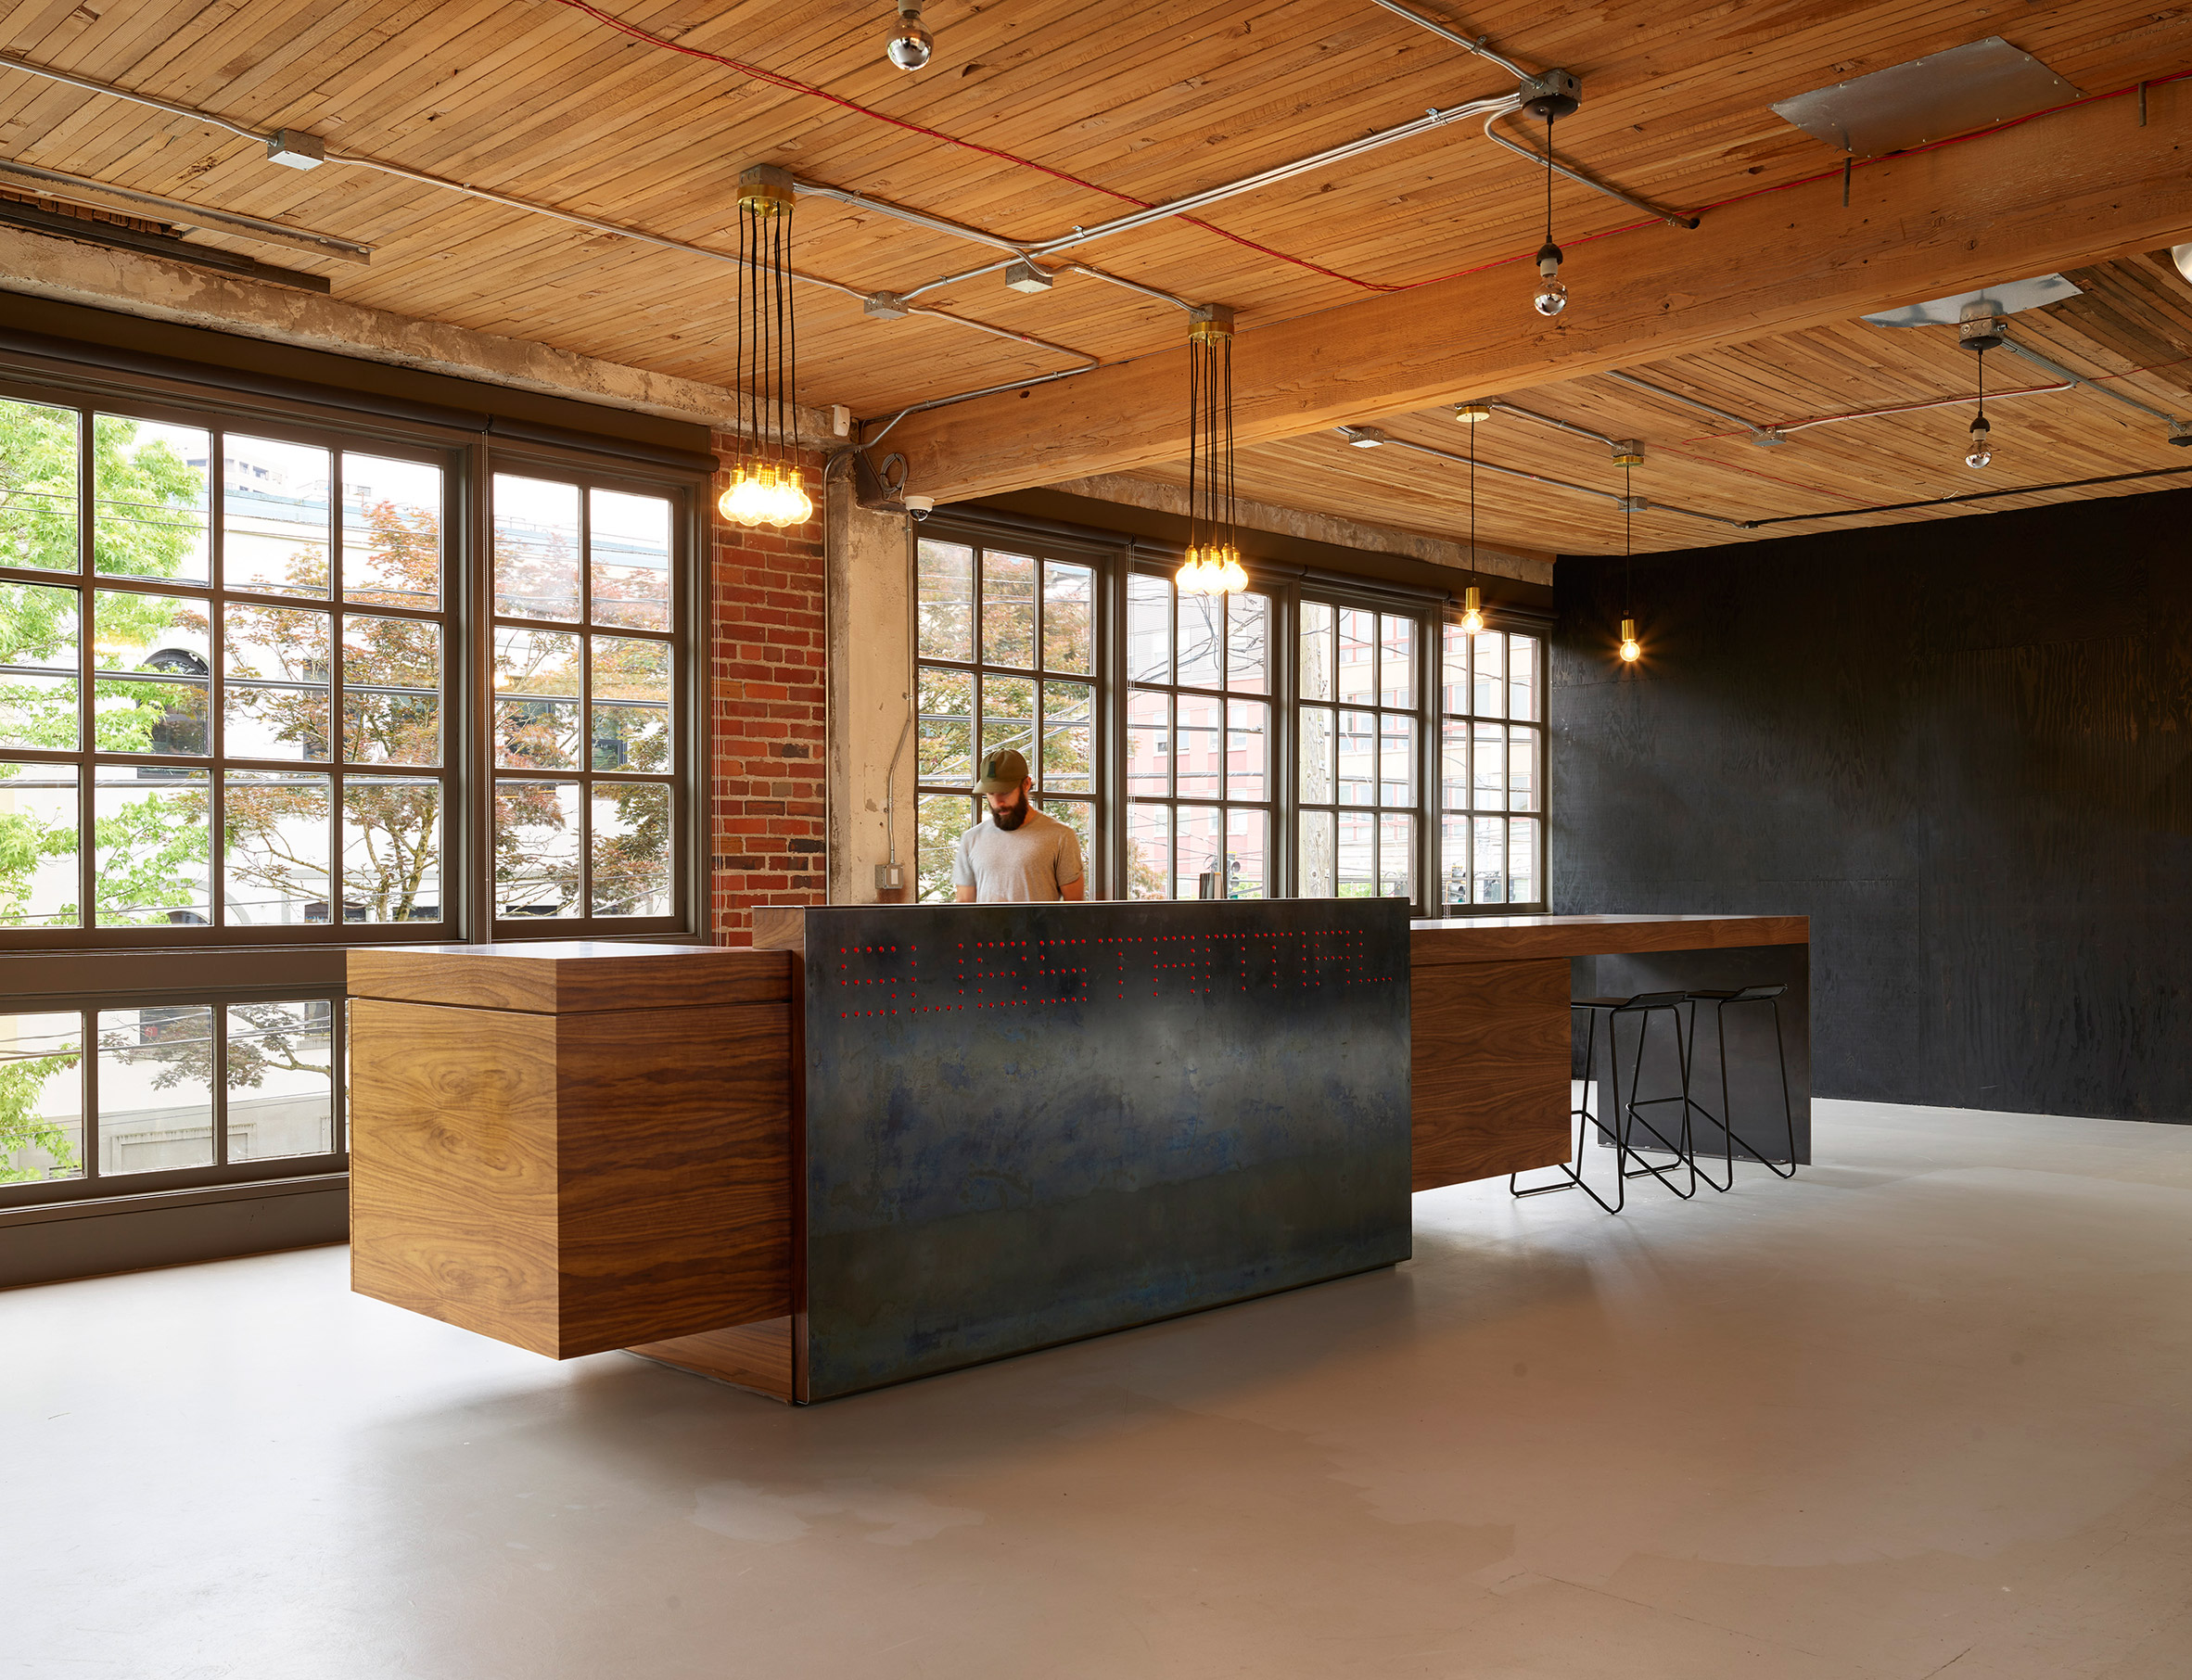 GoCstudio revamps century-old Seattle building to house digital product company